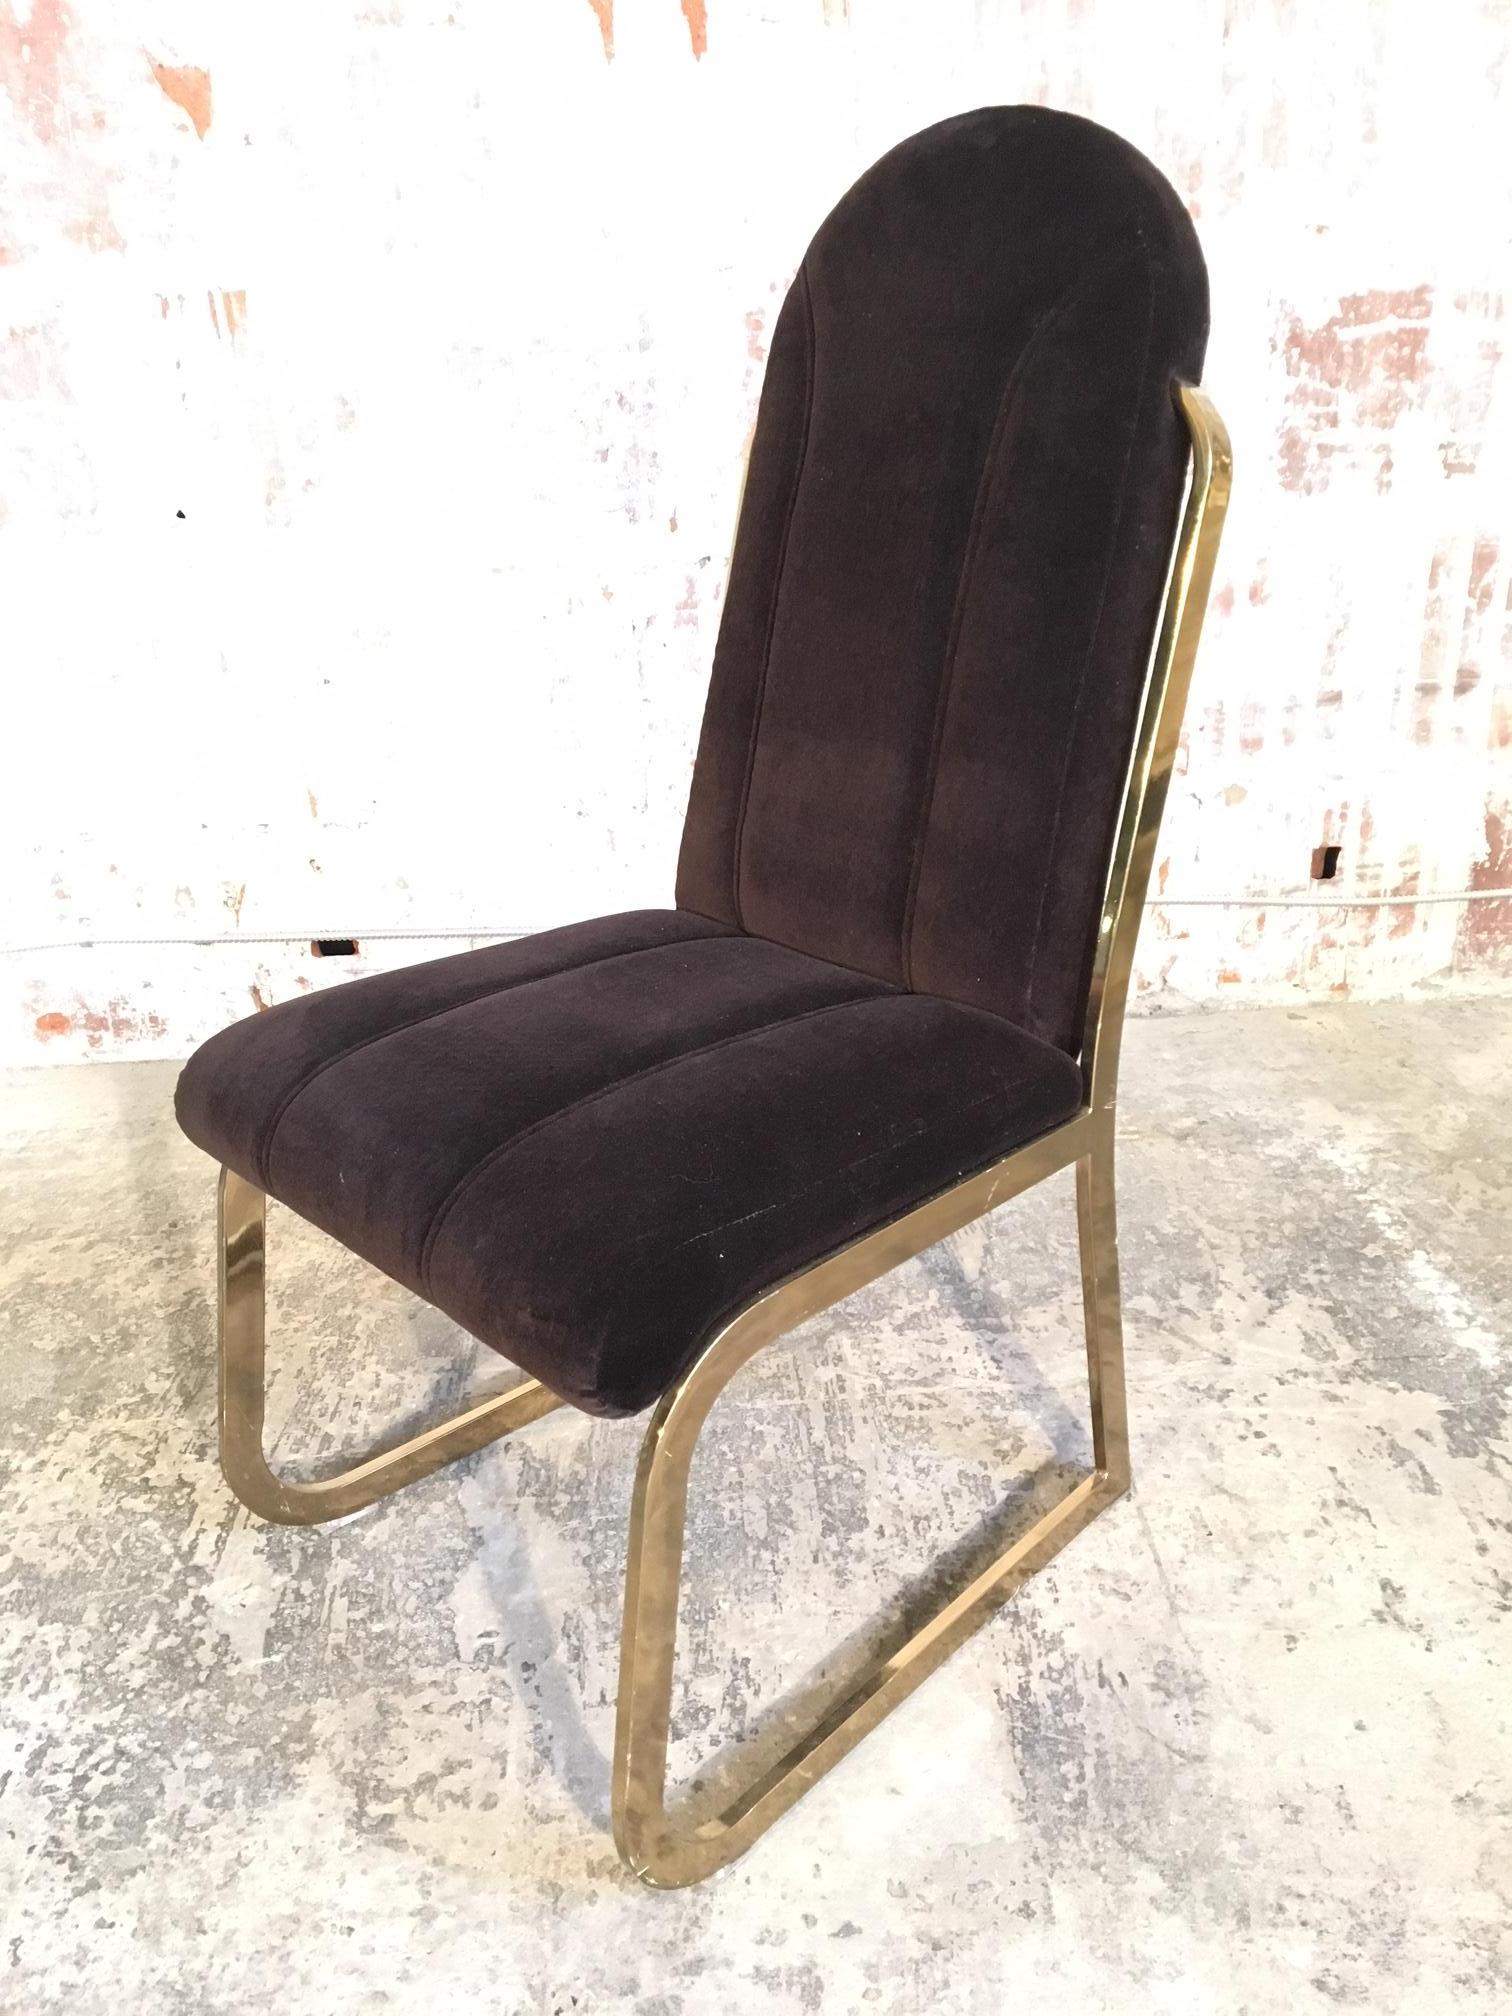 Set of 6 vintage Chromcraft dining chairs in the manor of Milo Baughman feature a heavy brass frame and brown velvet upholstery. Thick and comfortable seat and back with accent stitching. Very good vintage condition. Brass has minor marks consistent